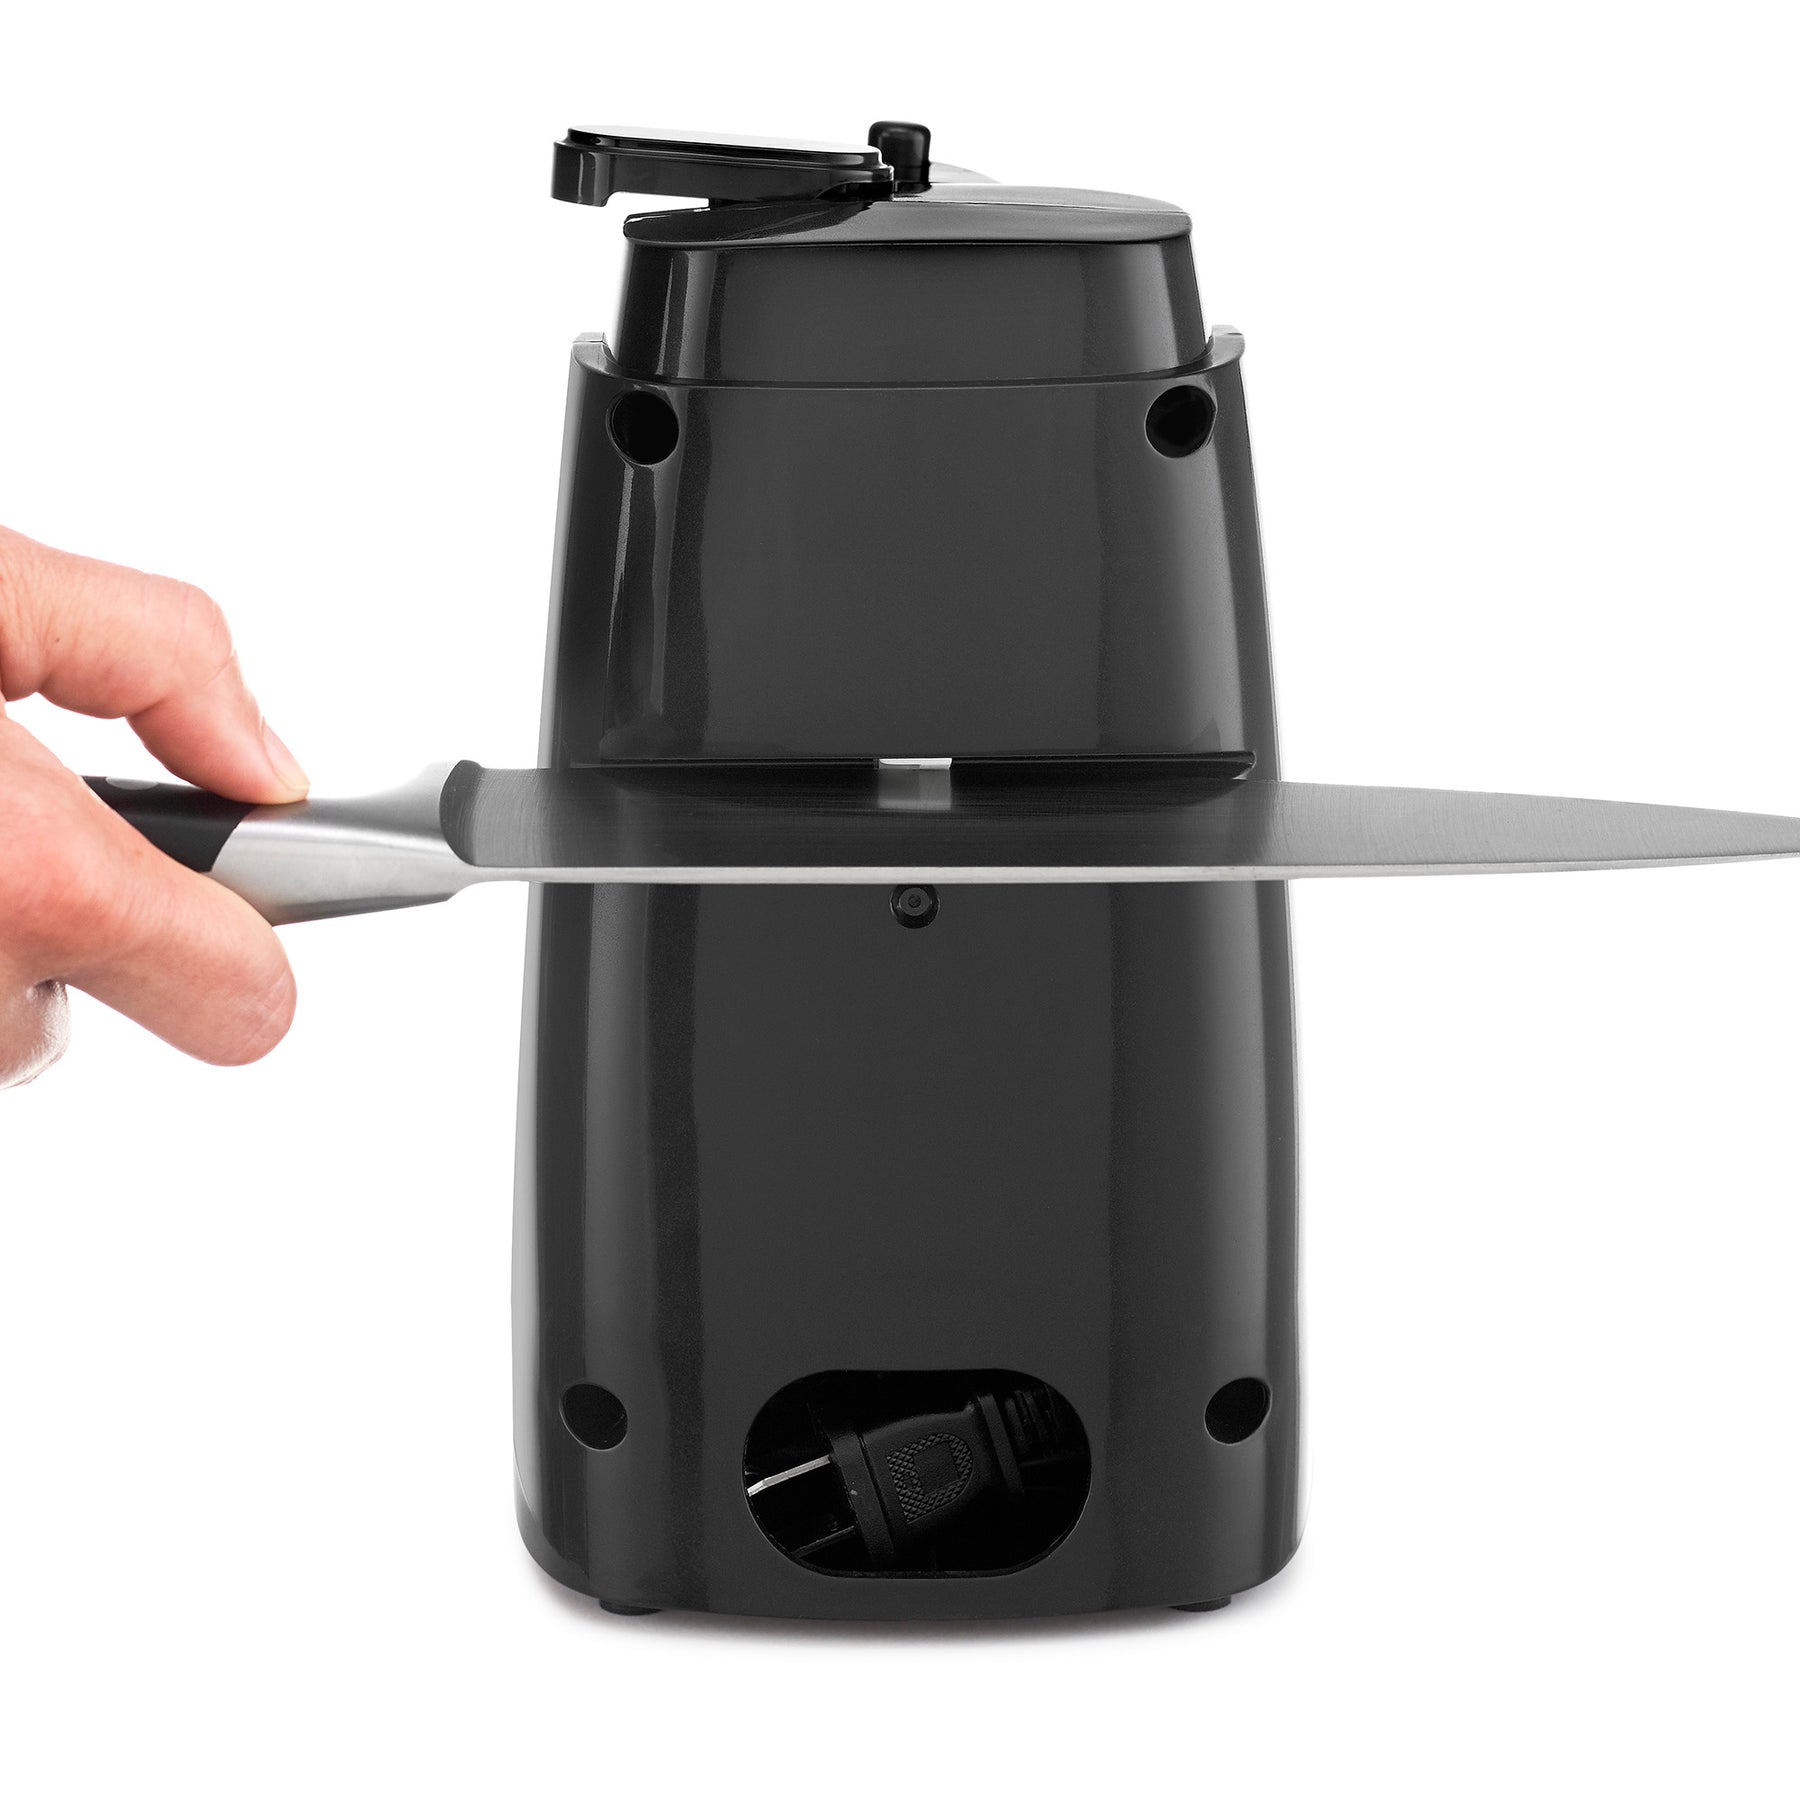  BELLA Electric Can Opener and Knife Sharpener, Multifunctional  Jar and Bottle Opener with Removable Cutting Lever and Cord Storage,  Stainless Steel Blade, Black : Home & Kitchen